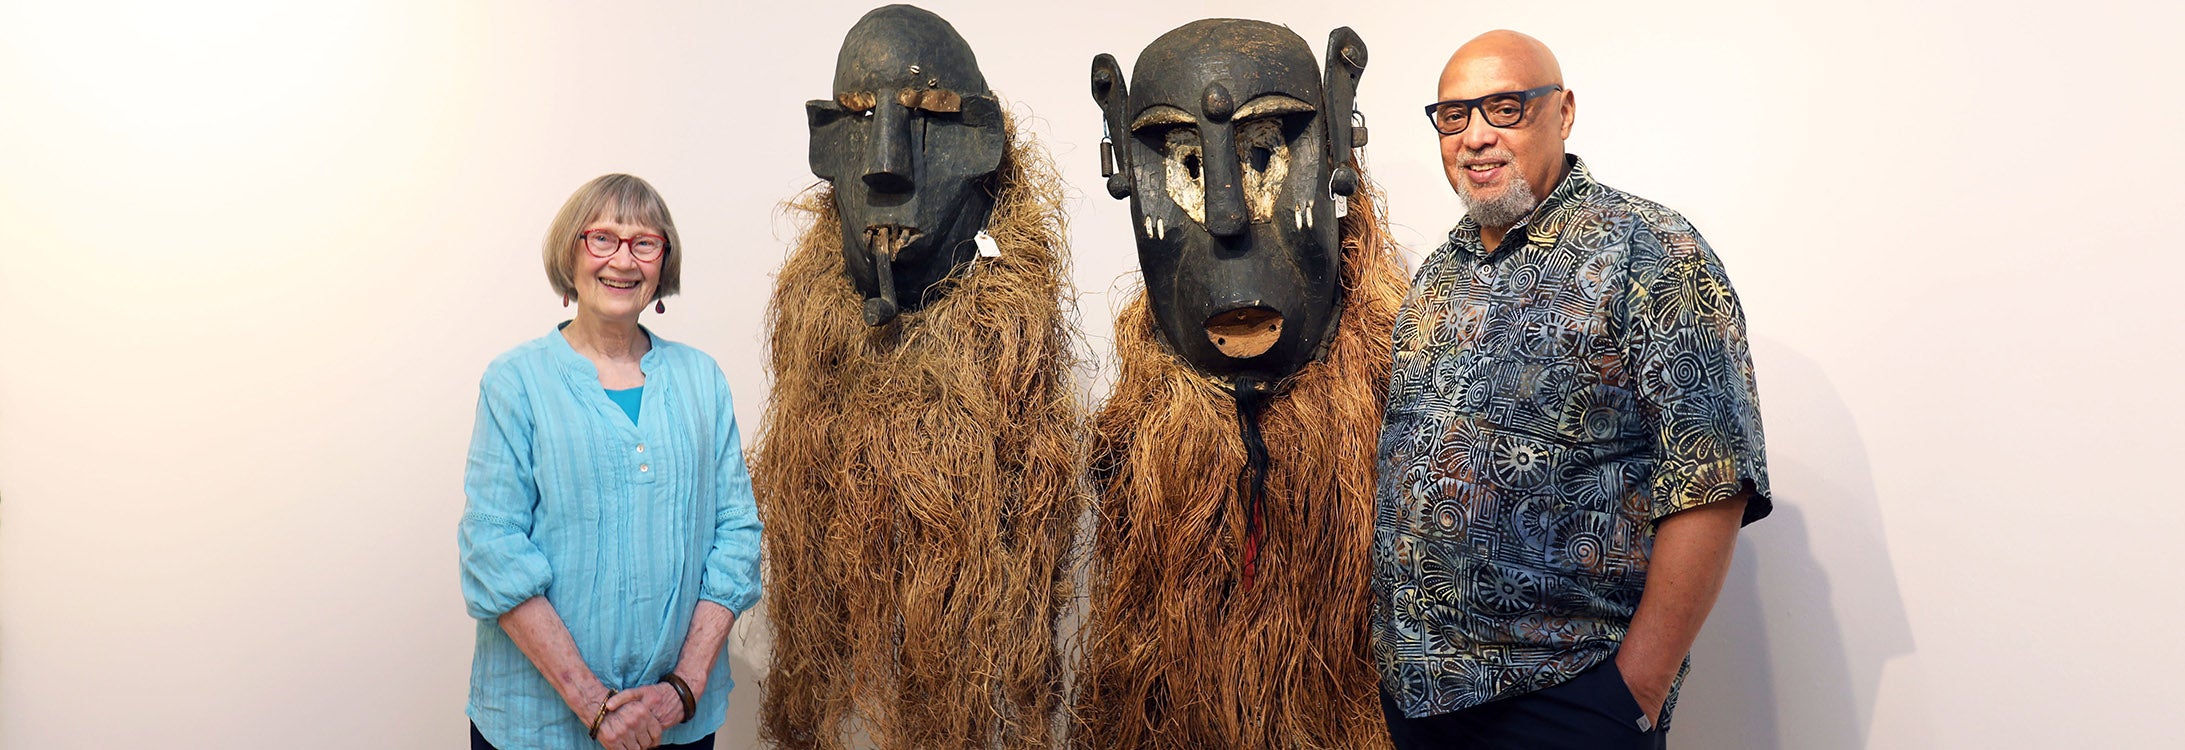 Celeste and Reginald Hodges of Durham stand beside 1950s Gongoli masks they donated to East Carolina University. The masks are part of a collection on exhibit at the Wellington B. Gray Gallery. (ECU photo by Kristen Martin)